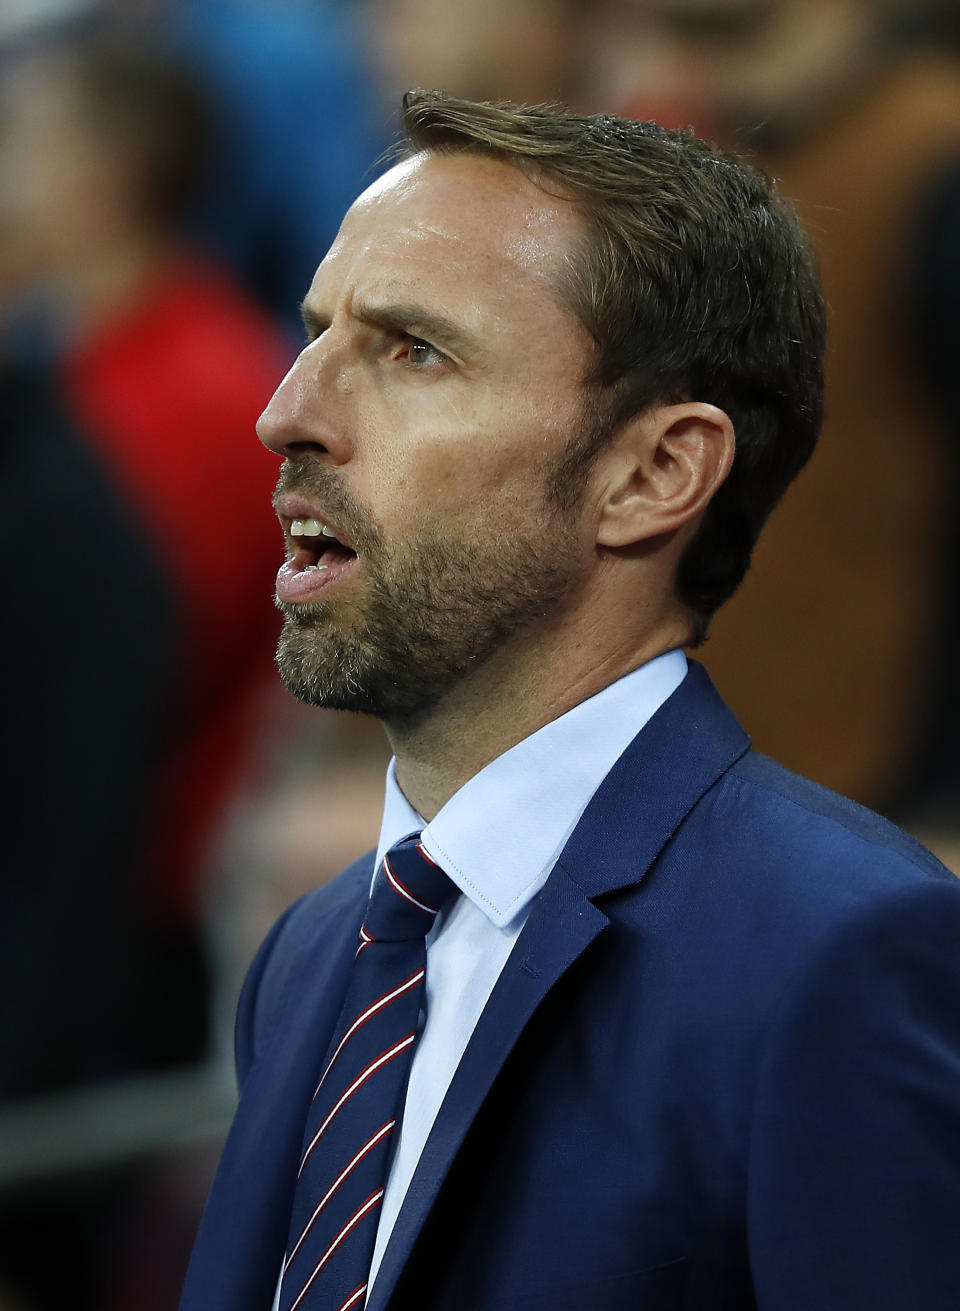 <p>England’s manager Gareth Southgate sings the anthem prior the World Cup Group F qualifying soccer match between England and Slovakia at Wembley Stadium in London, England, Monday, Sept. 4, 2017. (AP Photo/Kirsty Wigglesworth) </p>